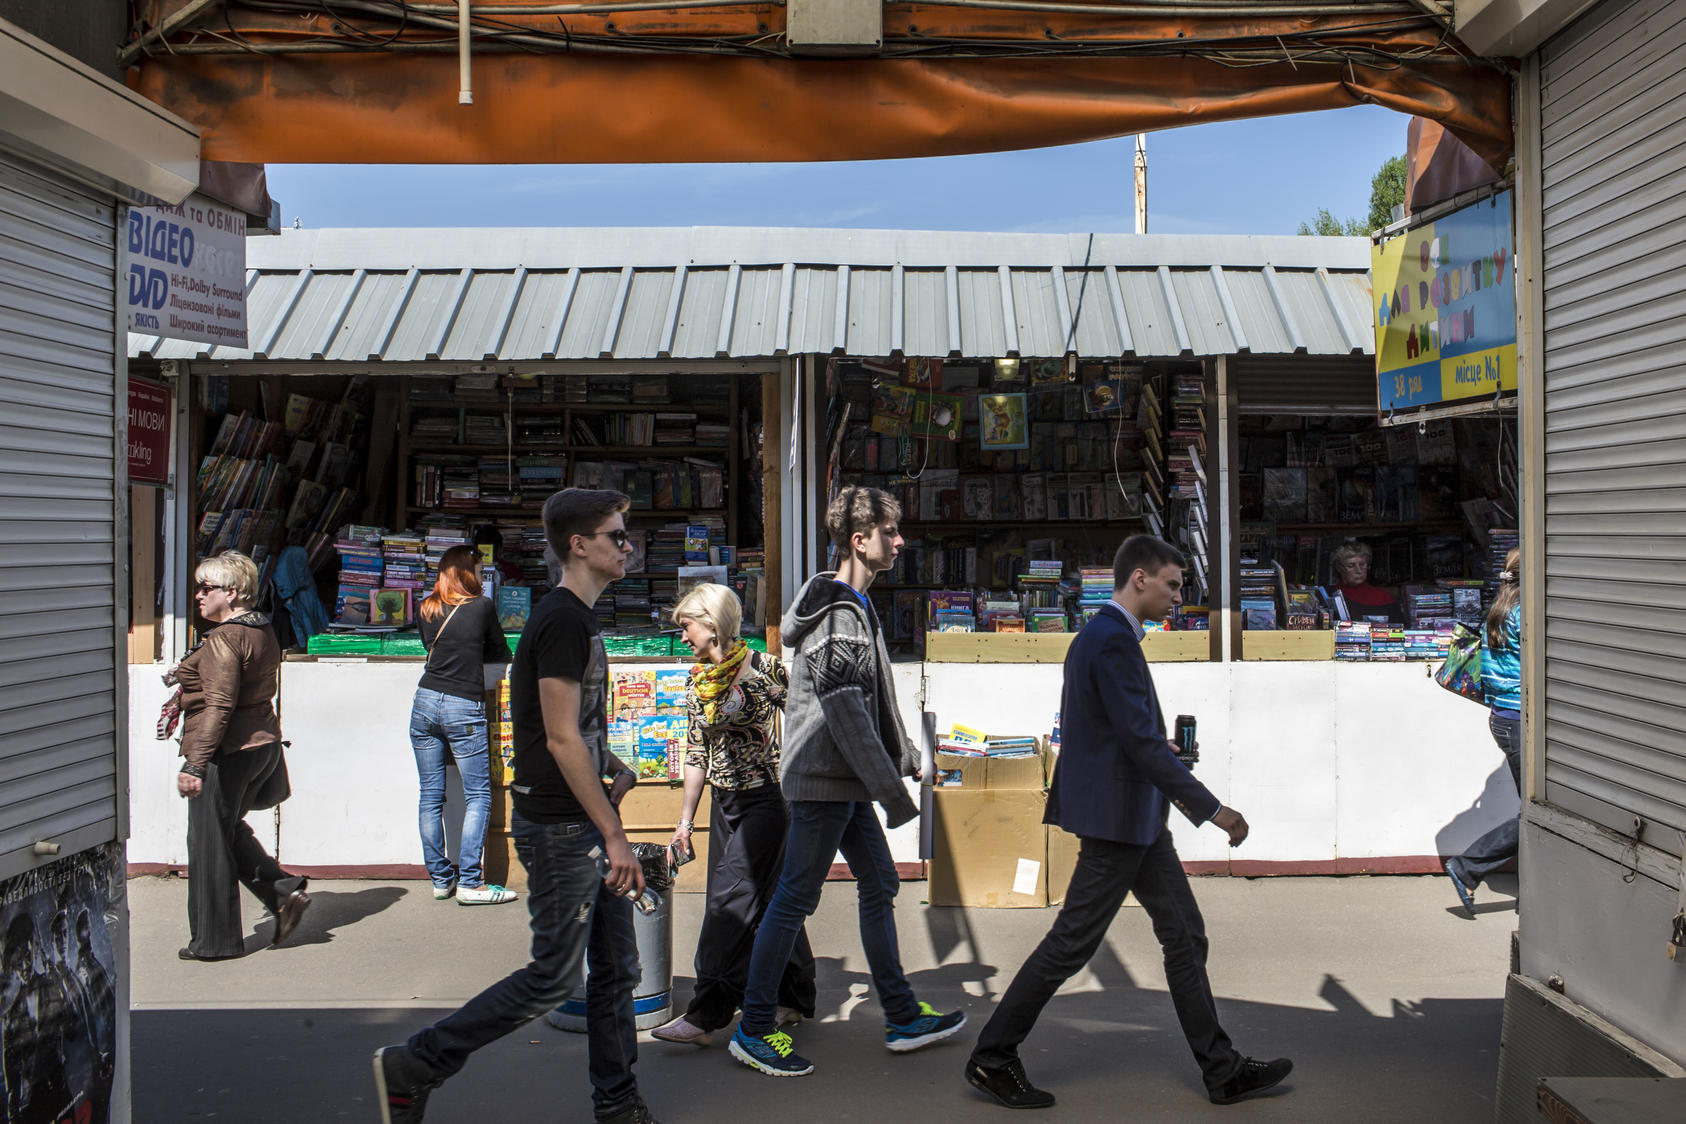 The Pretrivka market in Kiev, Ukraine, May 6, 2015. As the rest of Europe tries desperately to shrug off low inflation, Ukraine has added rapidly rising prices — officially up 61 percent, and perhaps more — to its long list of problems during its civil war with Russian-backed rebels. (Brendan Hoffman/The New York Times)